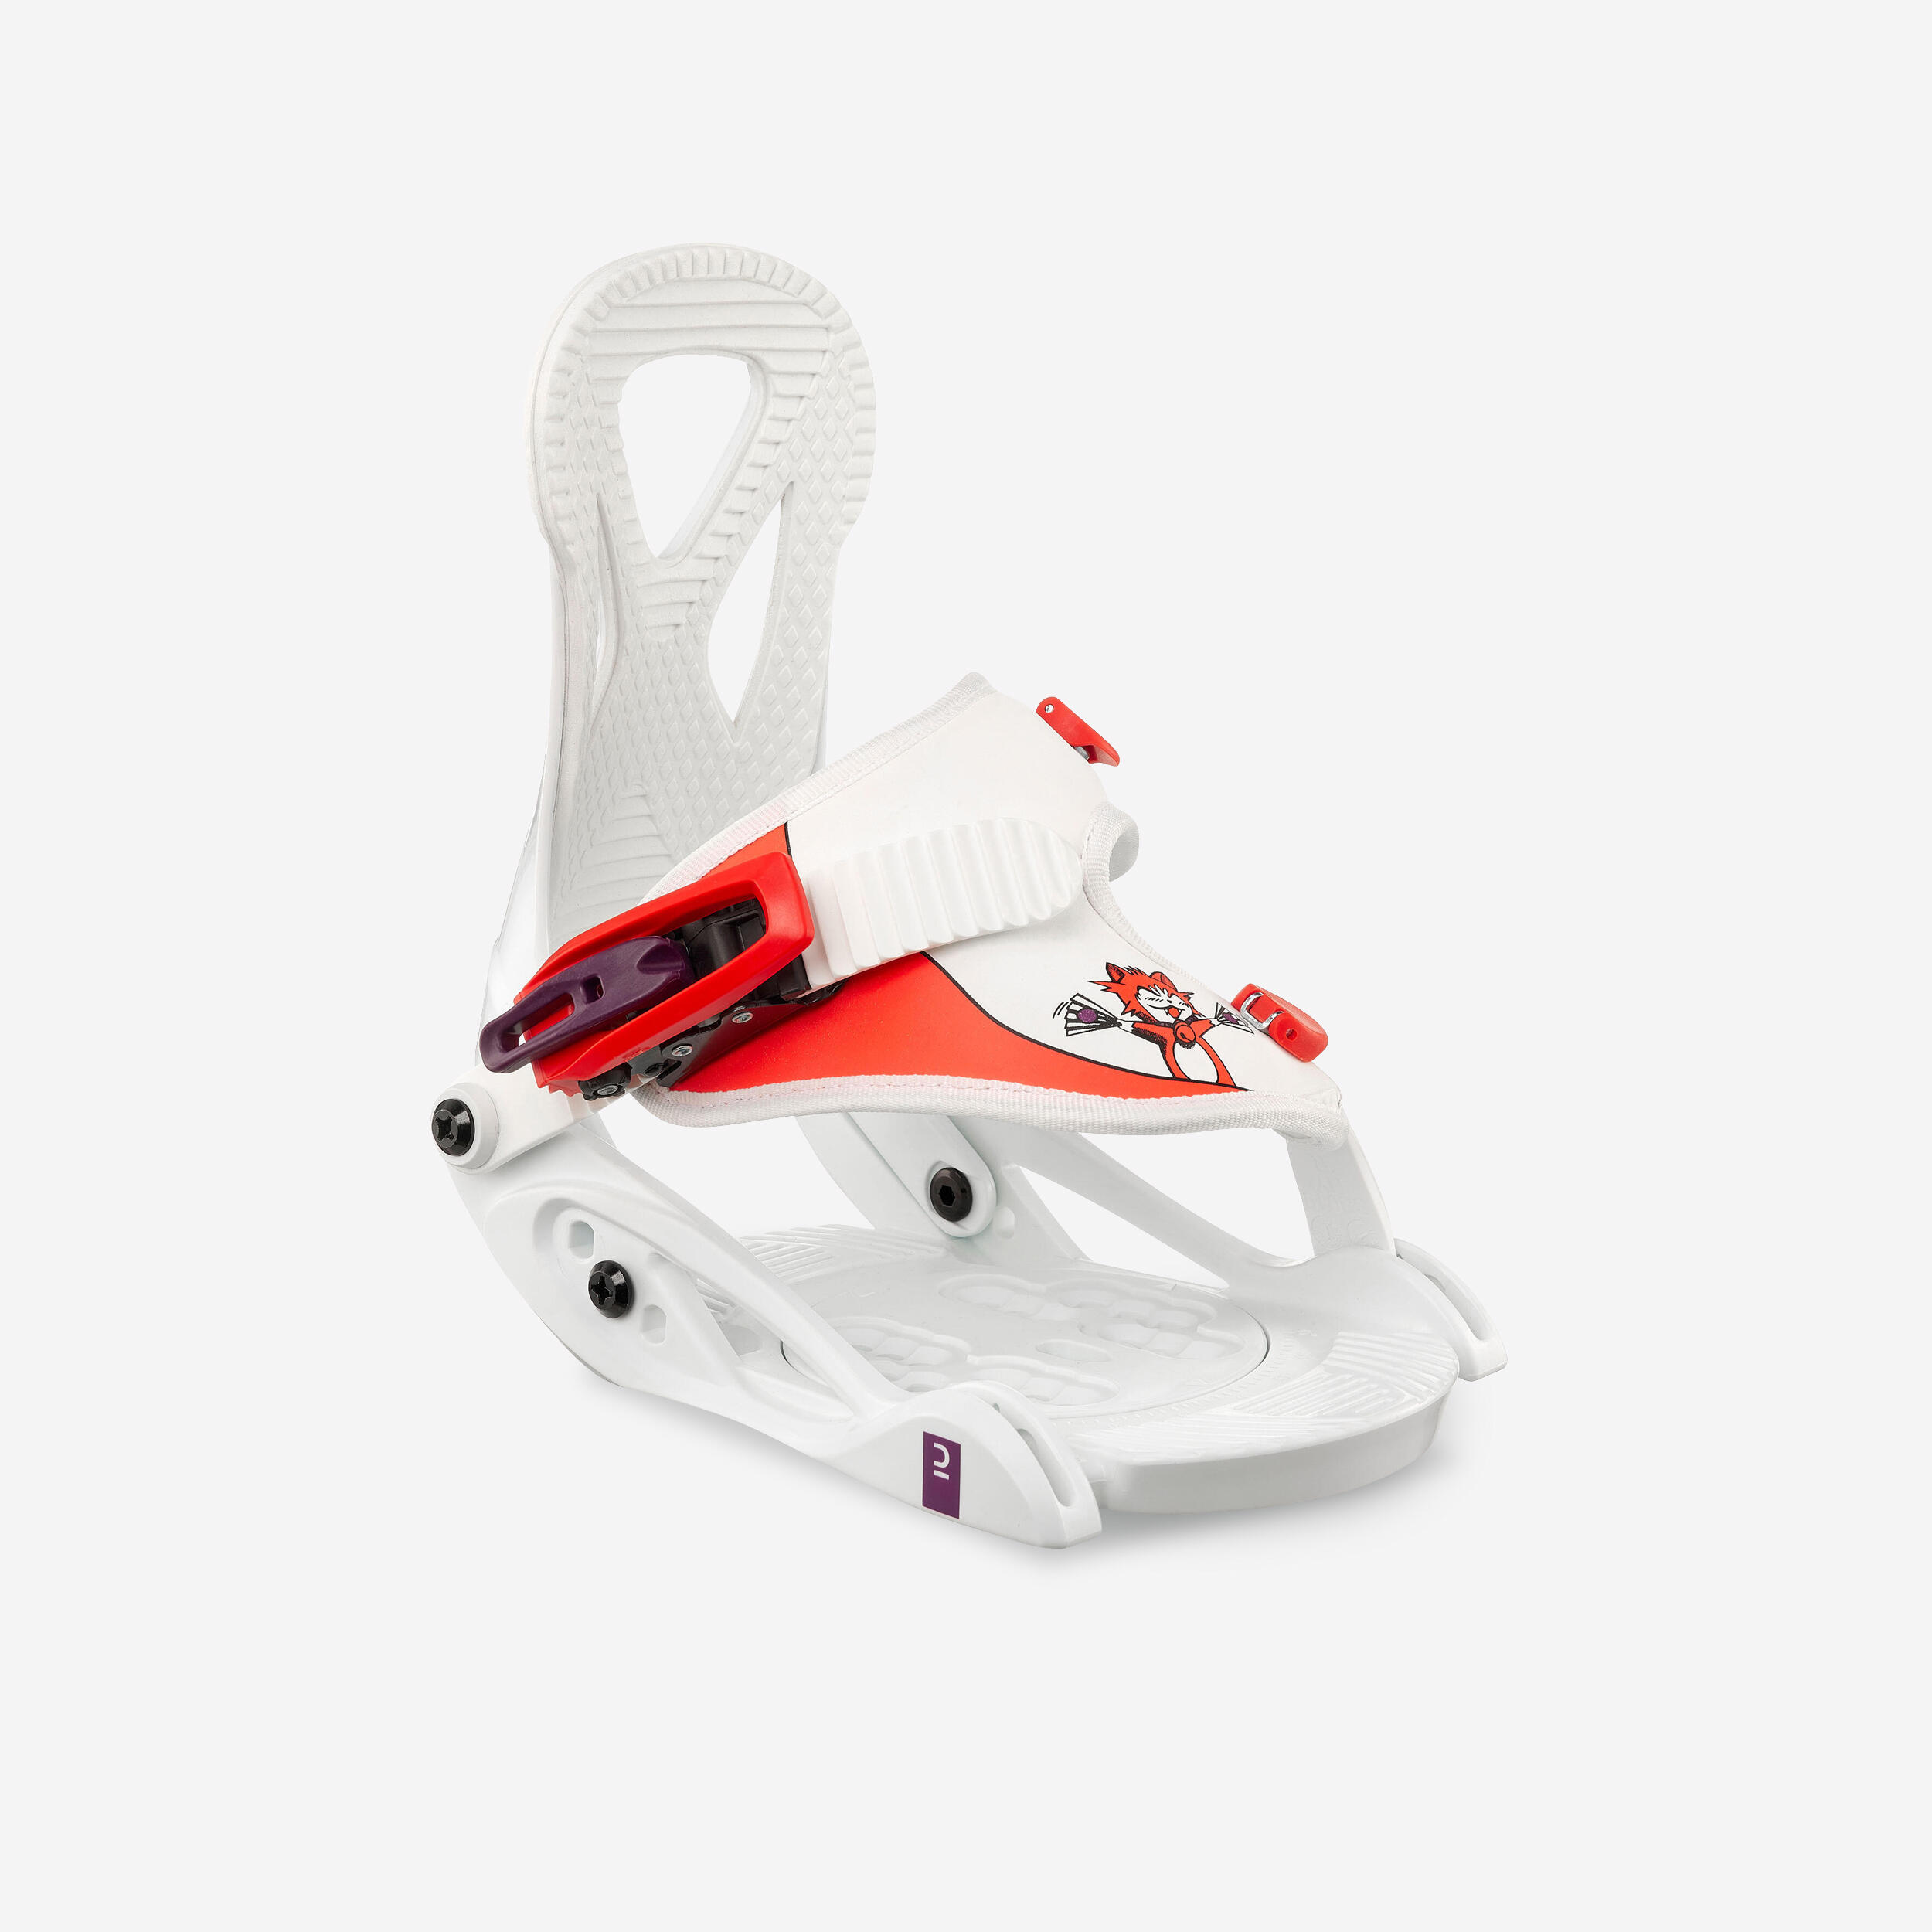 Kids’ Quick Snowboard Bindings  - Faky XS - White and Red 1/9